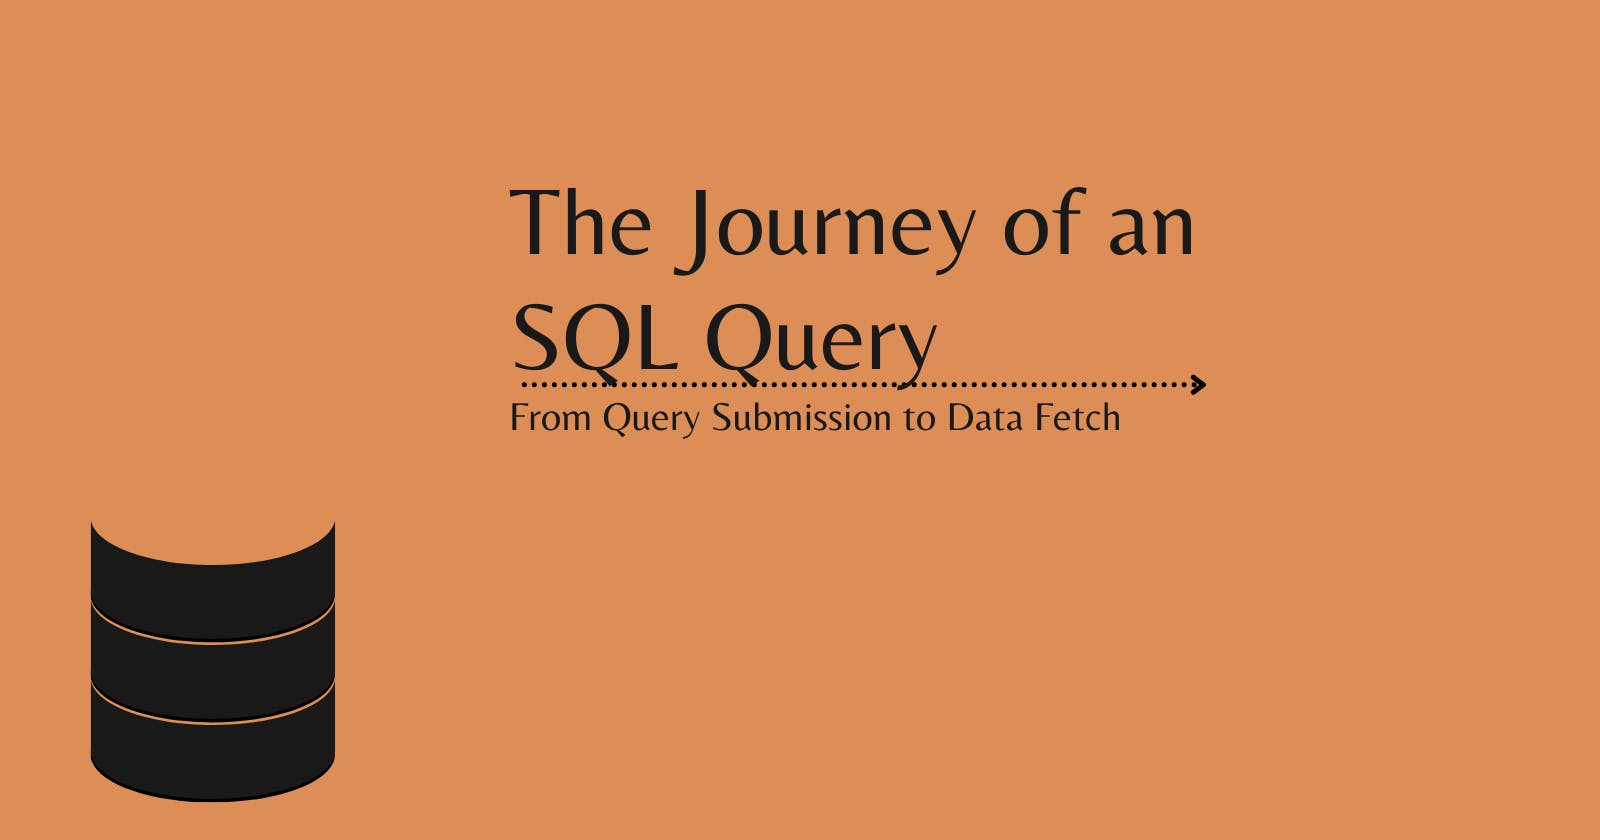 The Journey of an SQL query